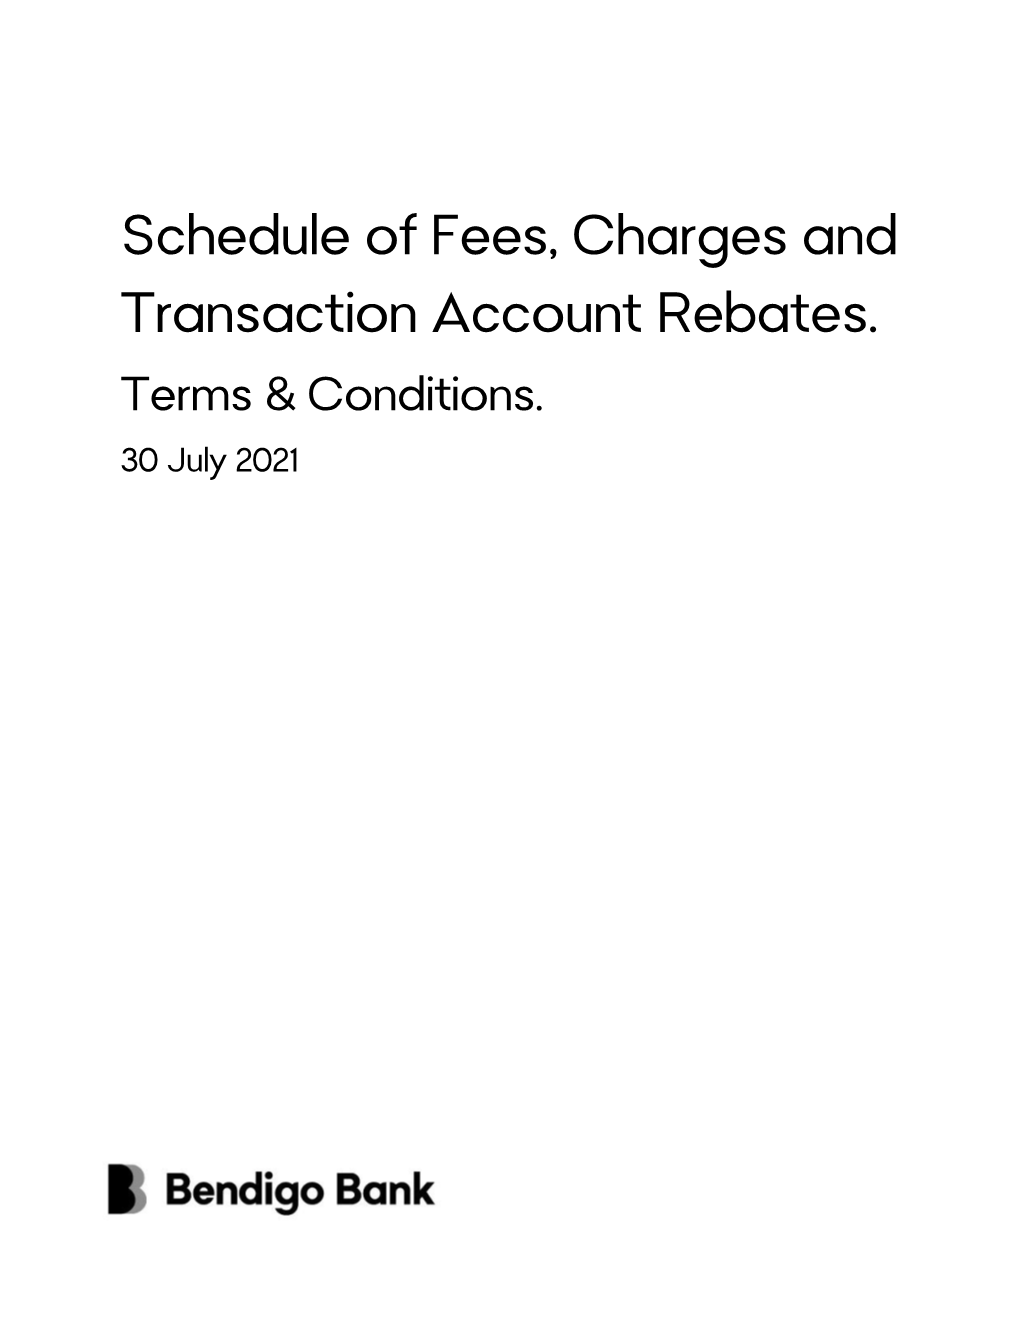 Schedule of Fees, Charges and Transaction Account Rebates. Terms & Conditions